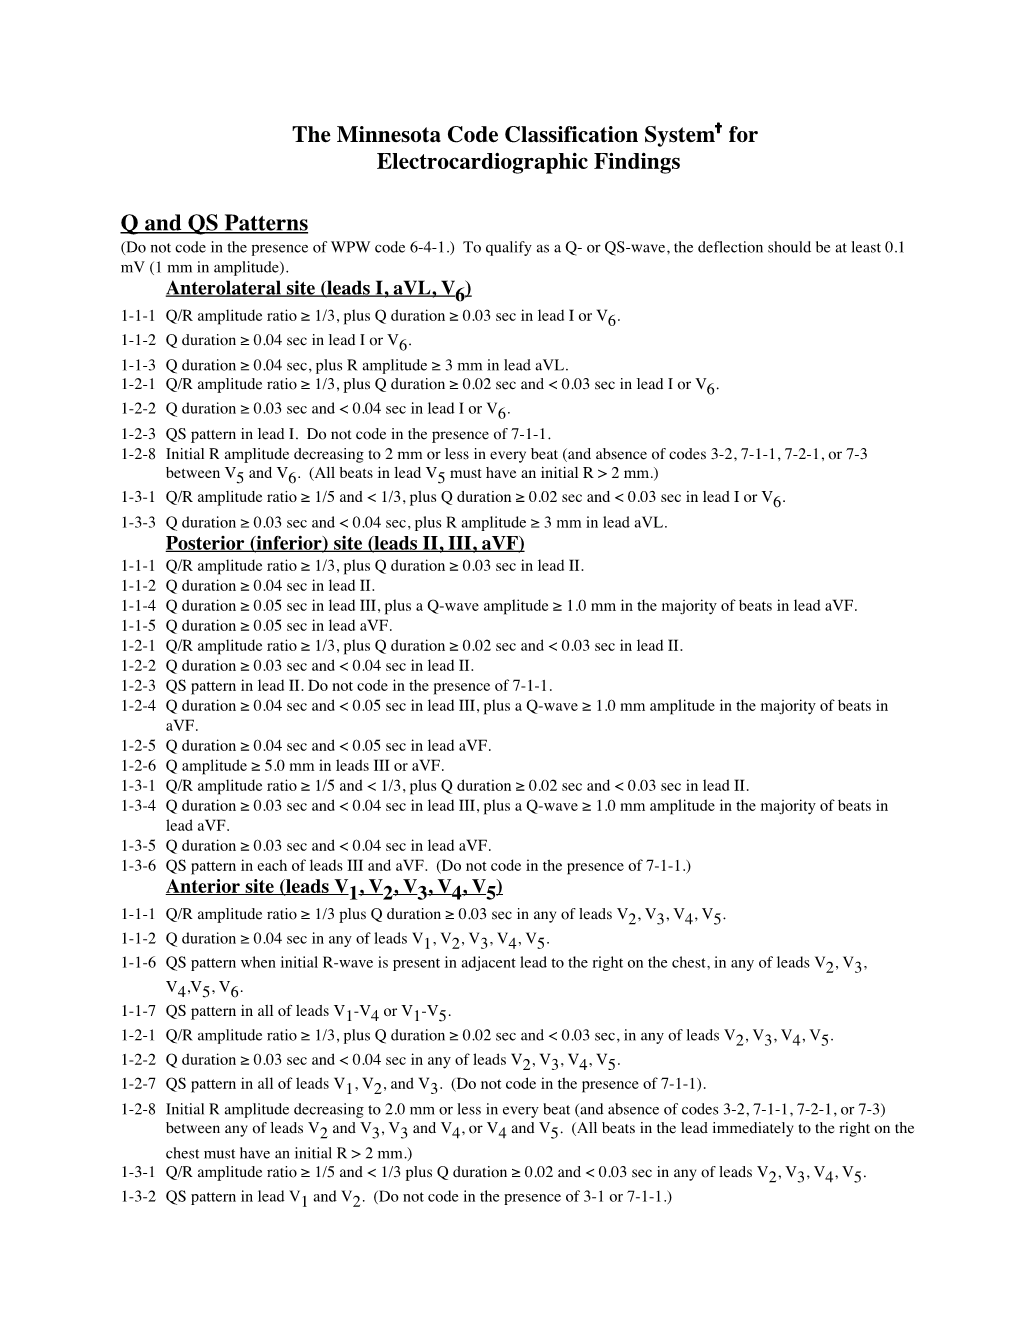 The Minnesota Code Classification System for Electrocardiographic